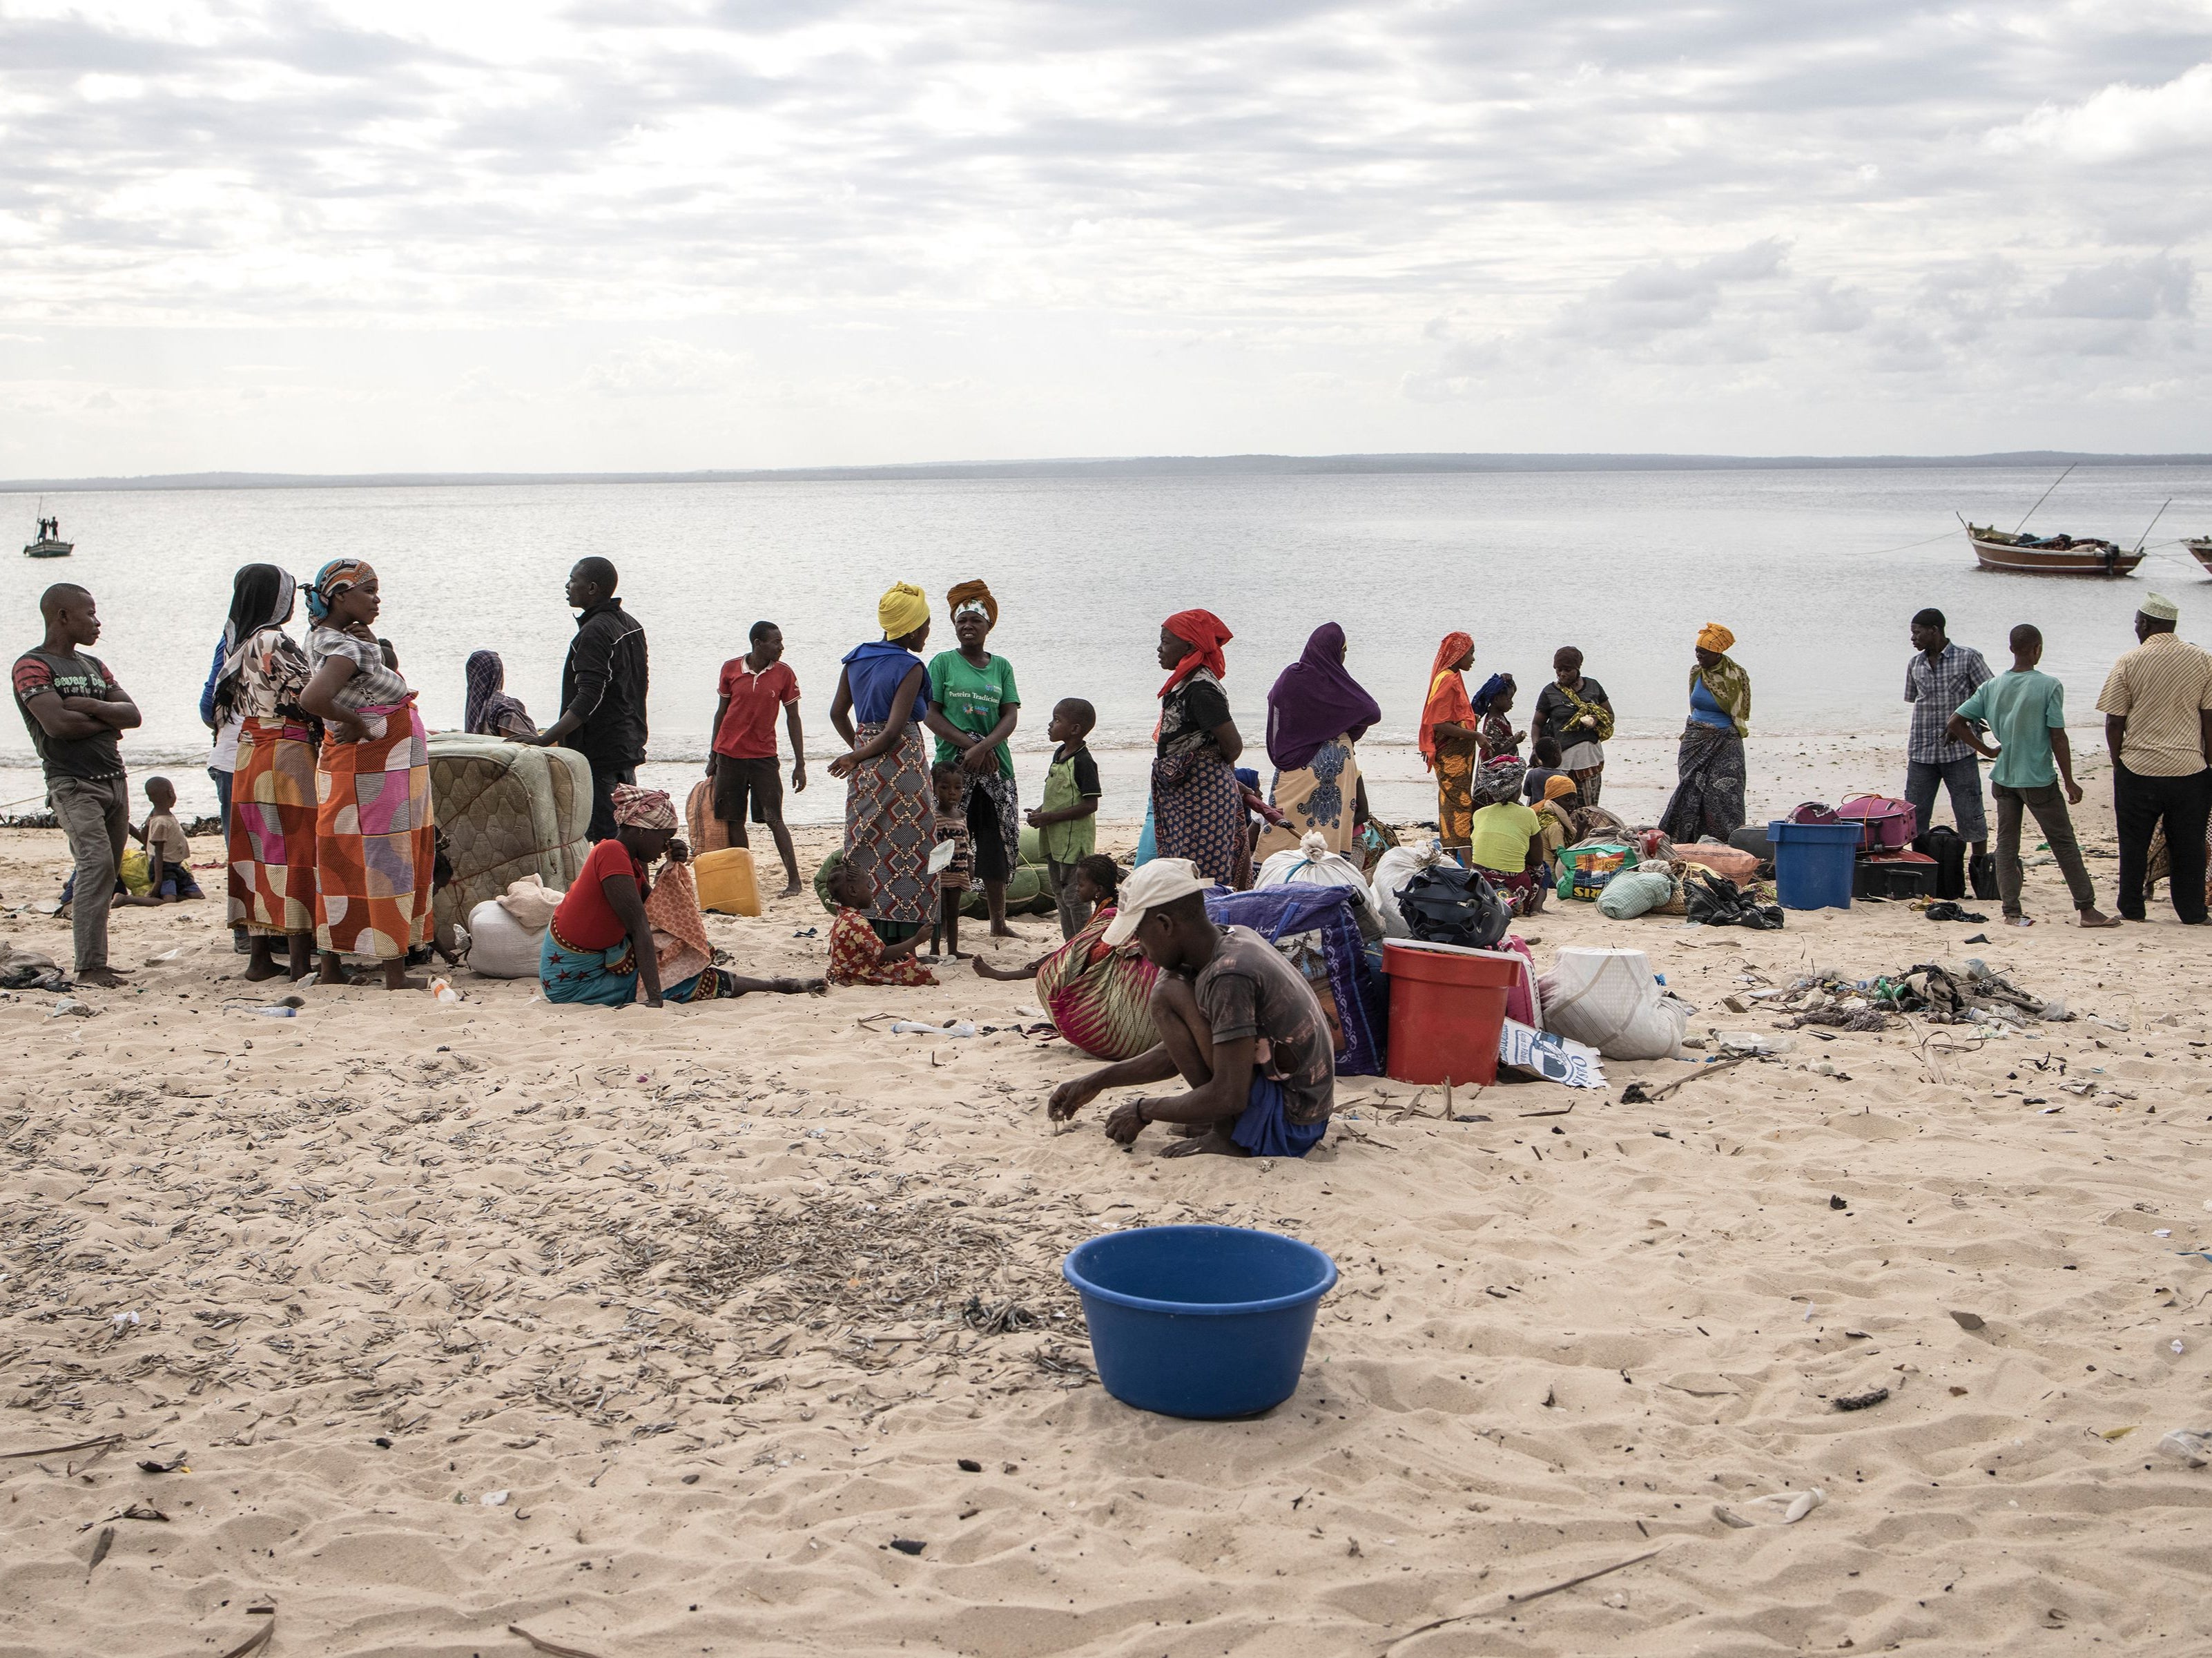 People gather with their belongings as they arrive at Paquitequete beach in Pemba on 22 May 2021 after fleeing Palma by boat